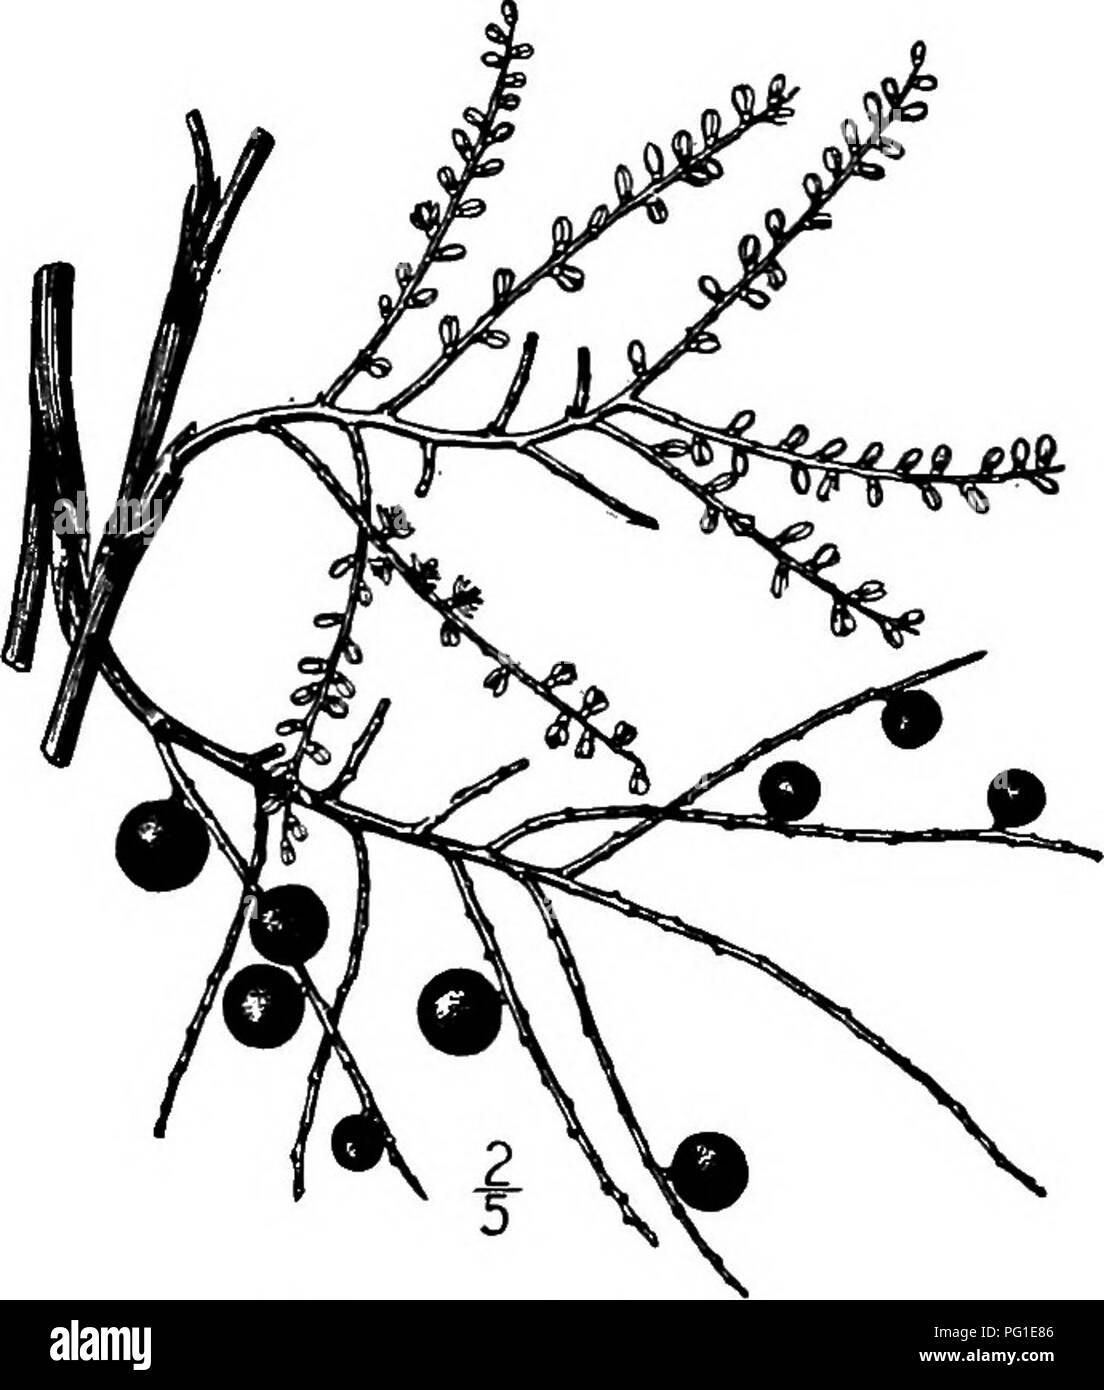 . North American trees : being descriptions and illustrations of the trees growing independently of cultivation in North America, north of Mexico and the West Indies . Trees. 136 The Palmetto III. THE PALMETTO GENUS SABAL ADANSON Species Sabal Palmetto (Walter) Roemer and Schultes Corypha Palmetto Walter. Chammrops Palmetto Michaux Inodes Palmetto O. F. Cook. Inodes Schwarzii O. F. Cook ABAL consists of five or more closely related species, natives of the southern United States, Bermuda, the West Indies, Mexico, and northern South America; they are readily known by the fiber-like threads which Stock Photo